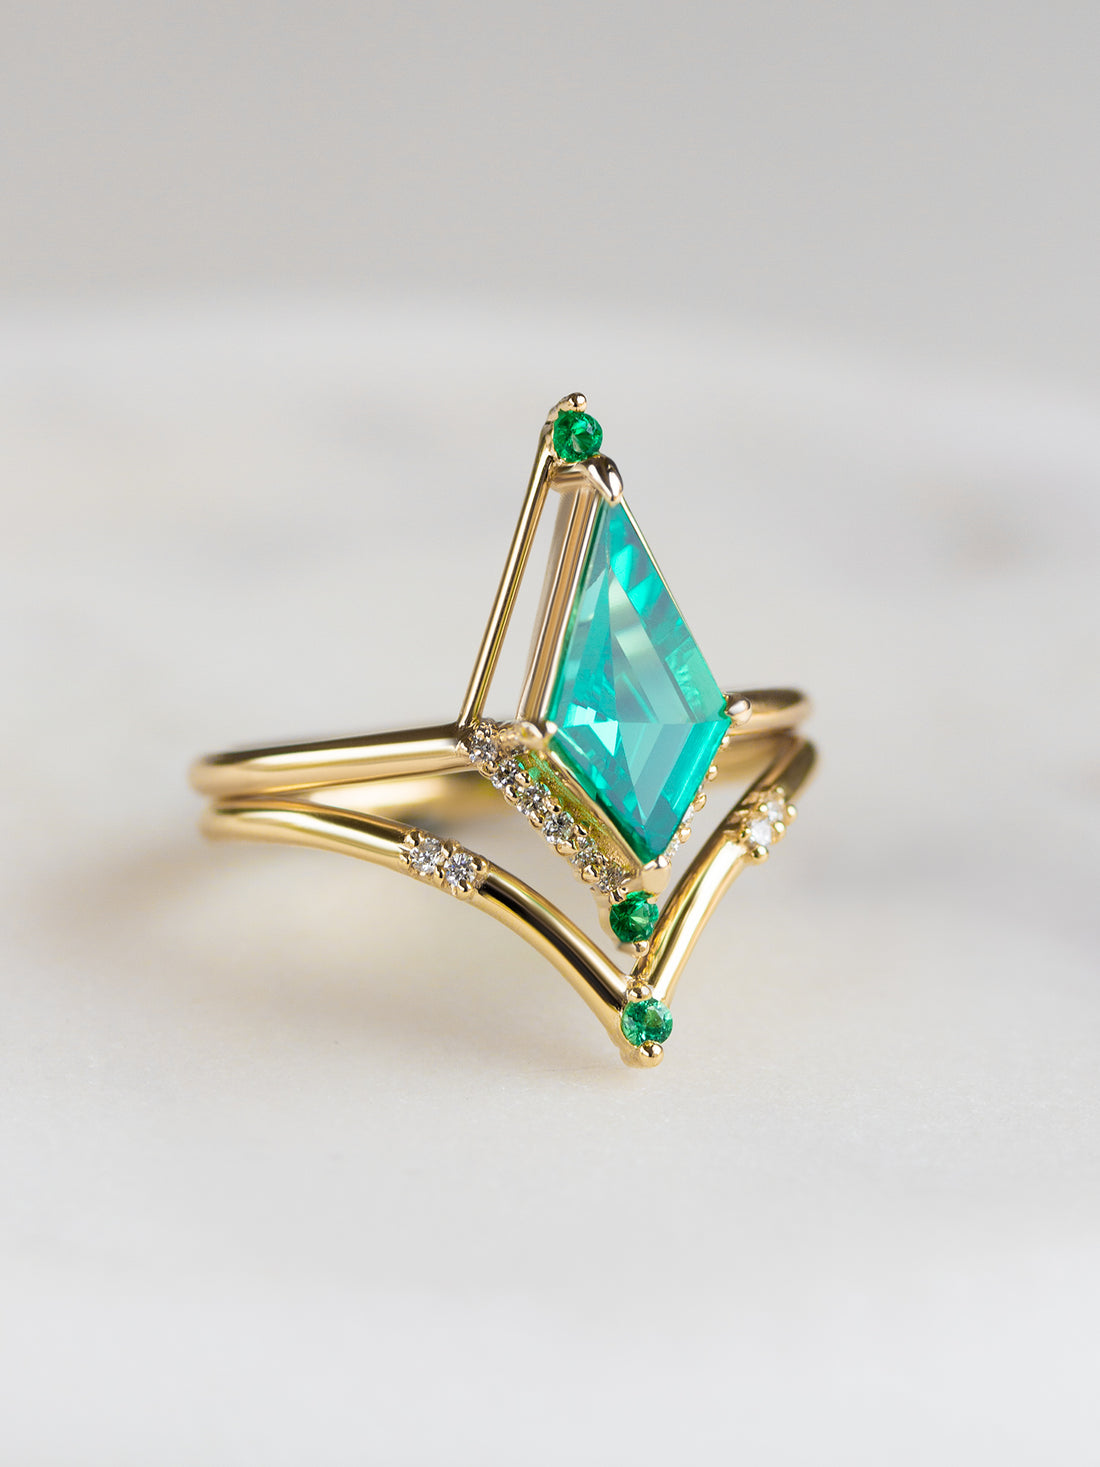 hiddenspace-engagement-ring-emerald-lucyring-diamond-proposal9